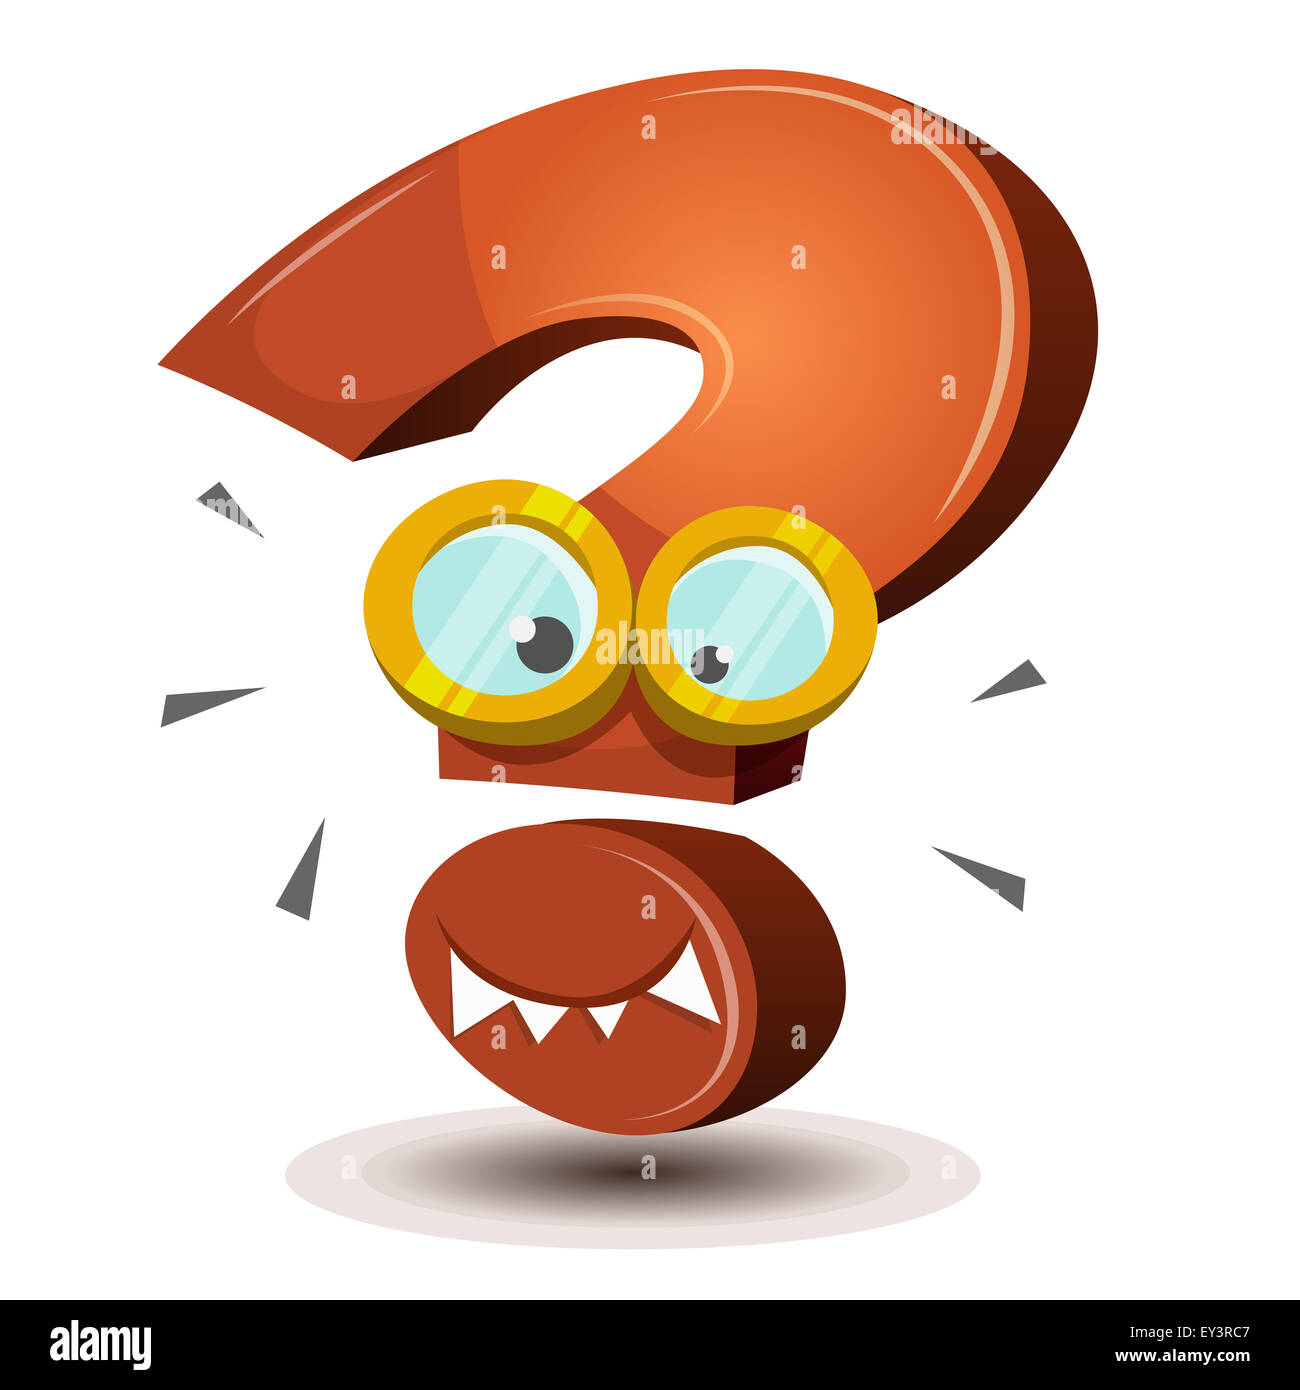 Illustration of a happy funny cartoon question mark character icon, for  search engine mascot symbol Stock Photo - Alamy